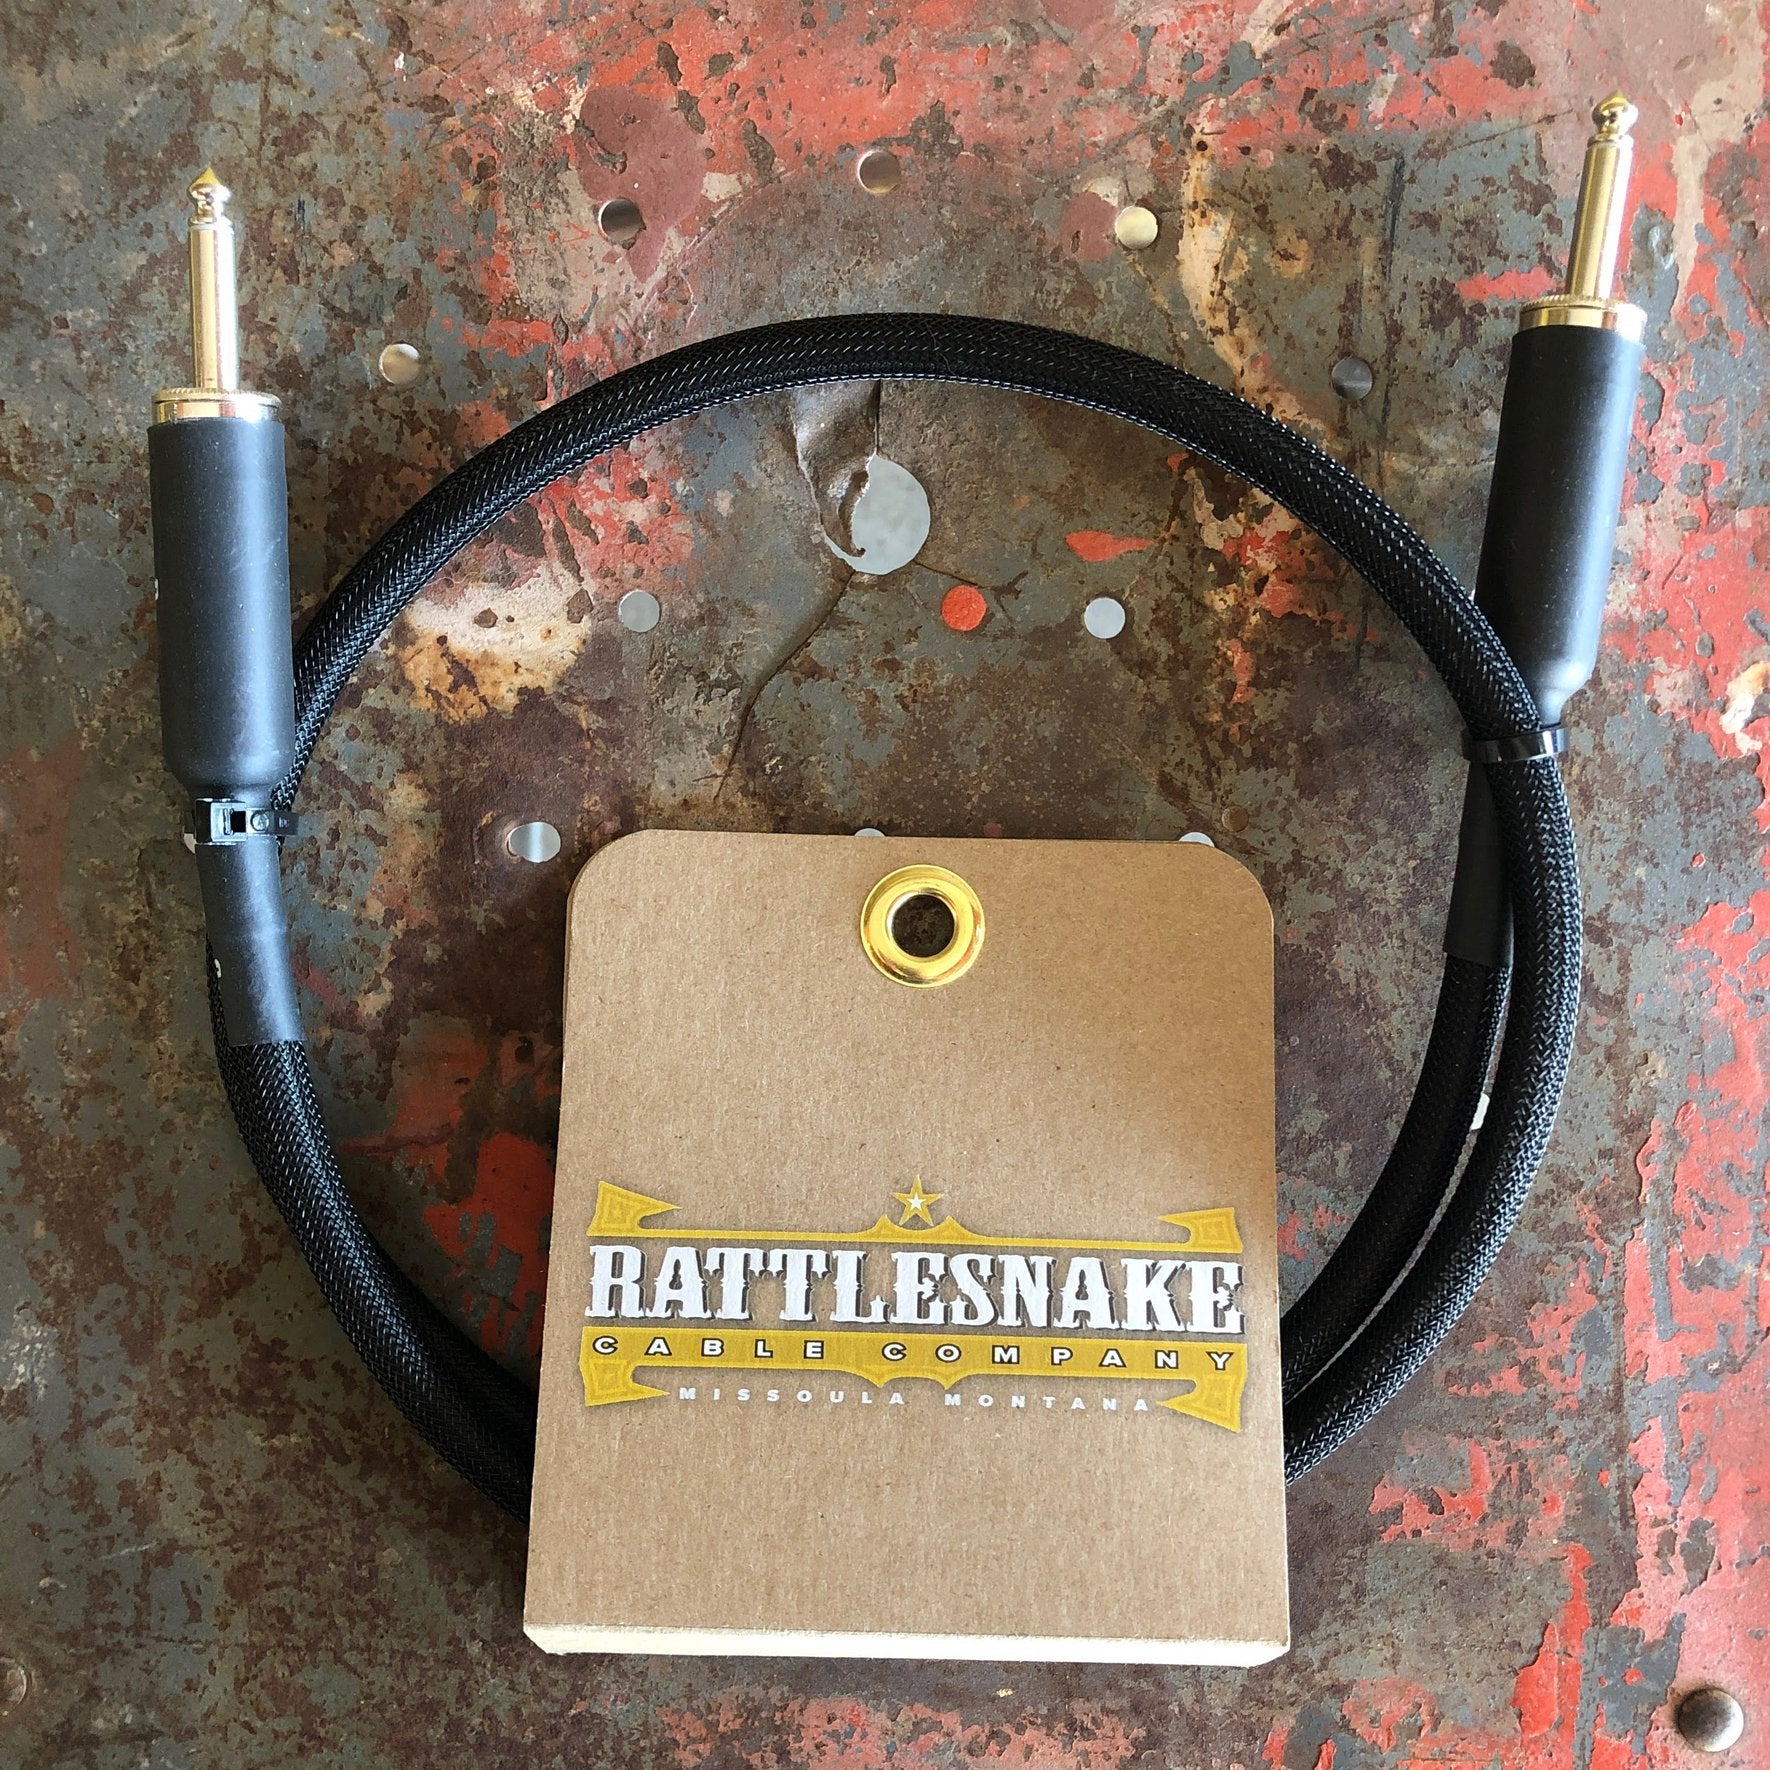 Rattlesnake Cable Company 3' Speaker Cable - Black